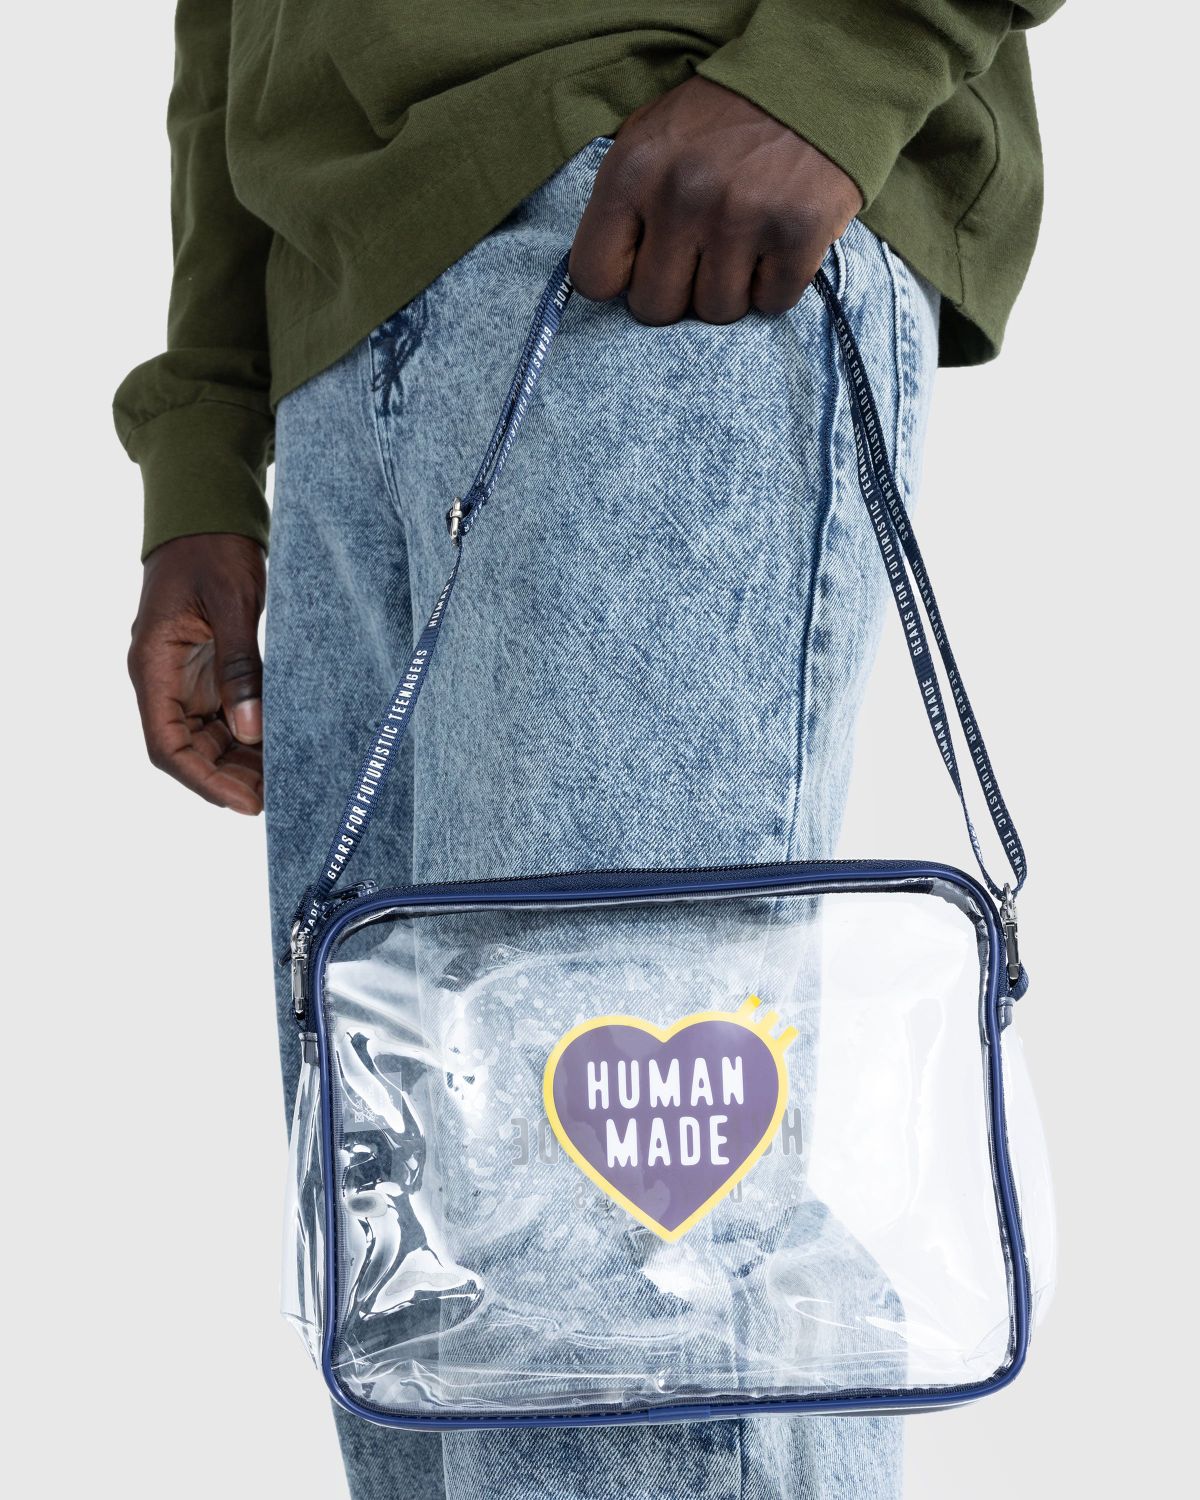 Human Made – PVC Pouch Large Navy